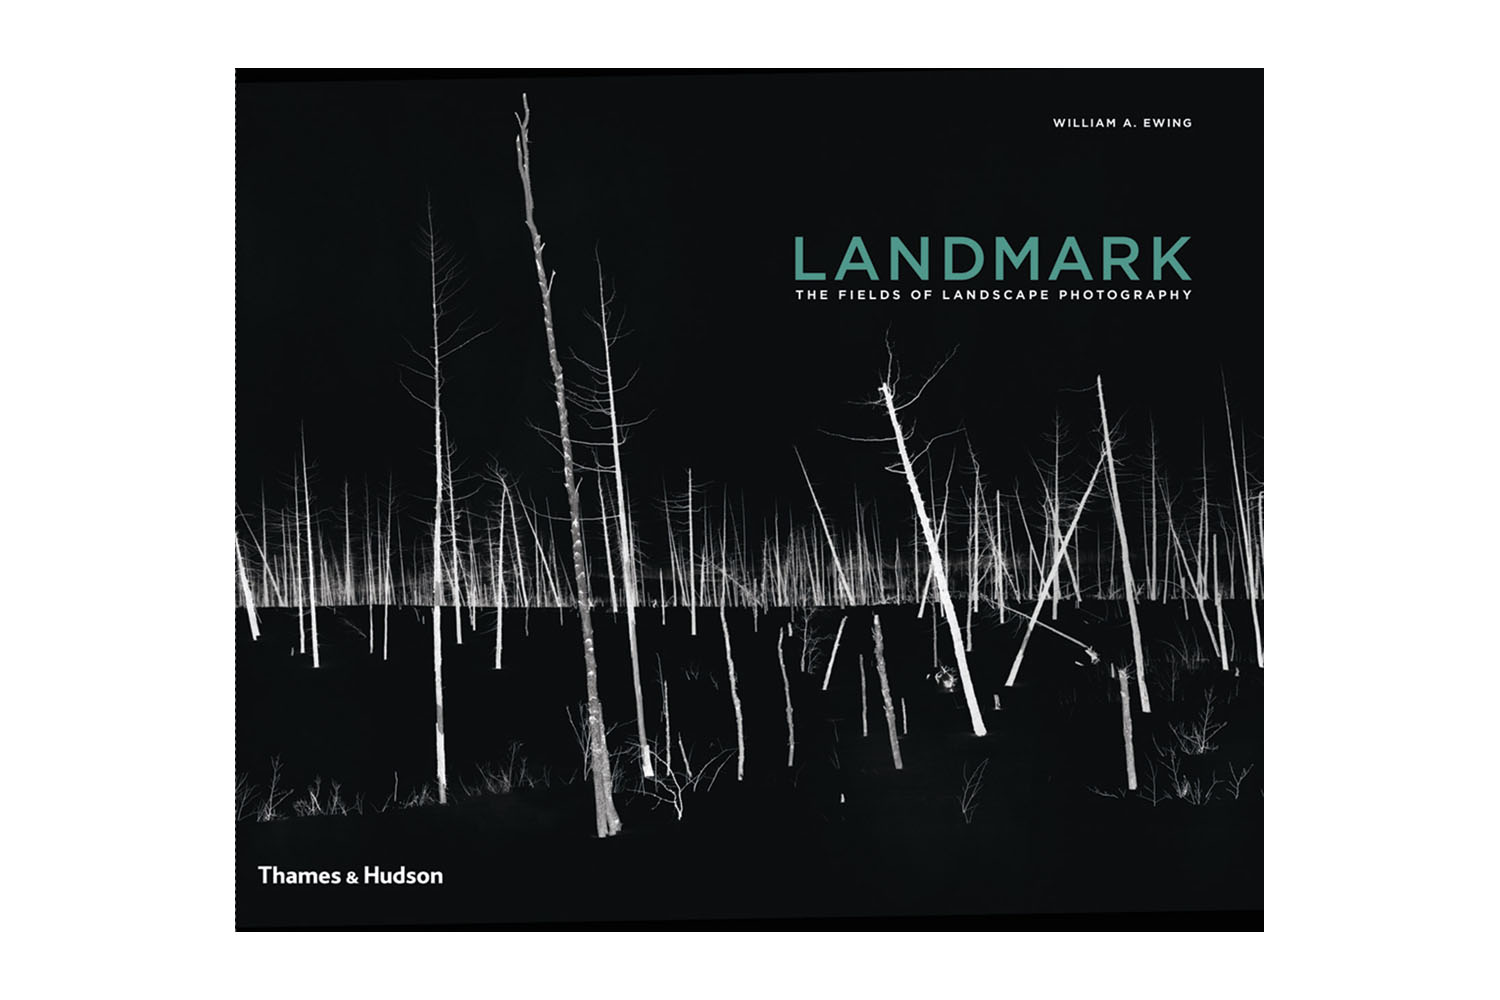 Landmark: The Fields of Landscape Photography published by Thames &amp; Hudson Mining the rich and storied genre of landscape photography, Landmark compiles the work of over 100 photographers and their aesthetic fascination with and visual interpretation of the physical world.